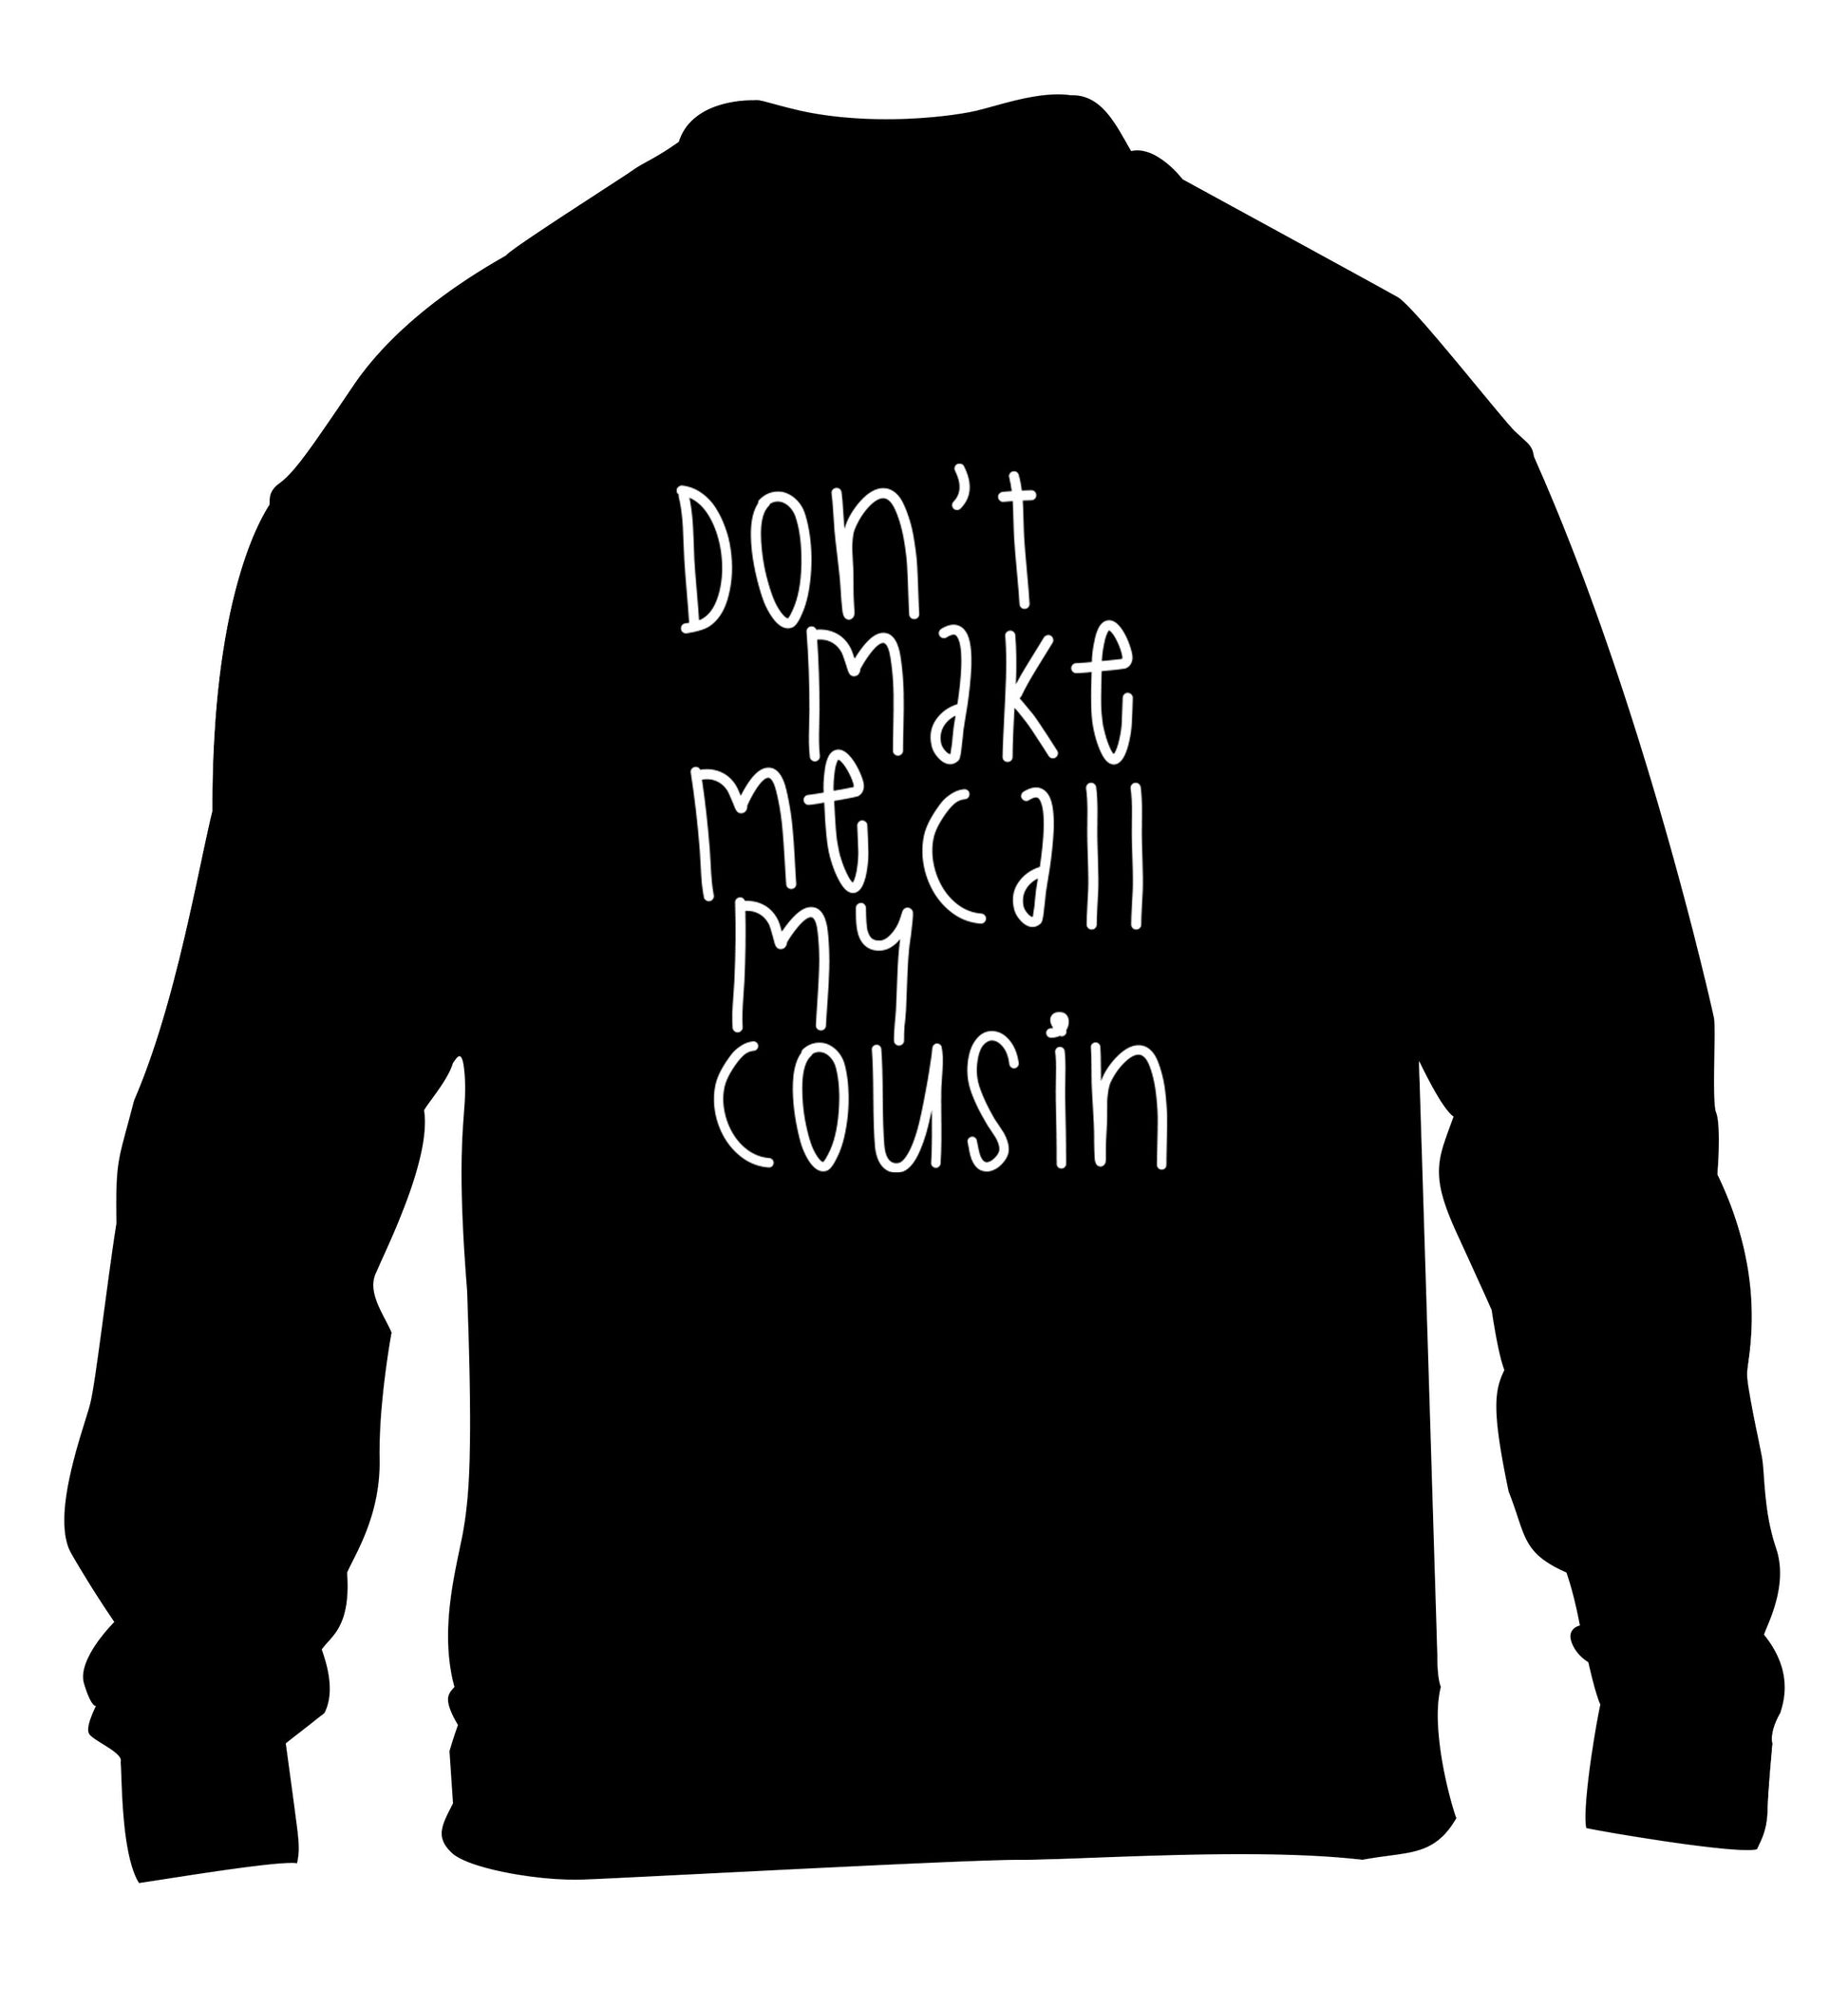 Don't make me call my cousin children's black sweater 12-14 Years